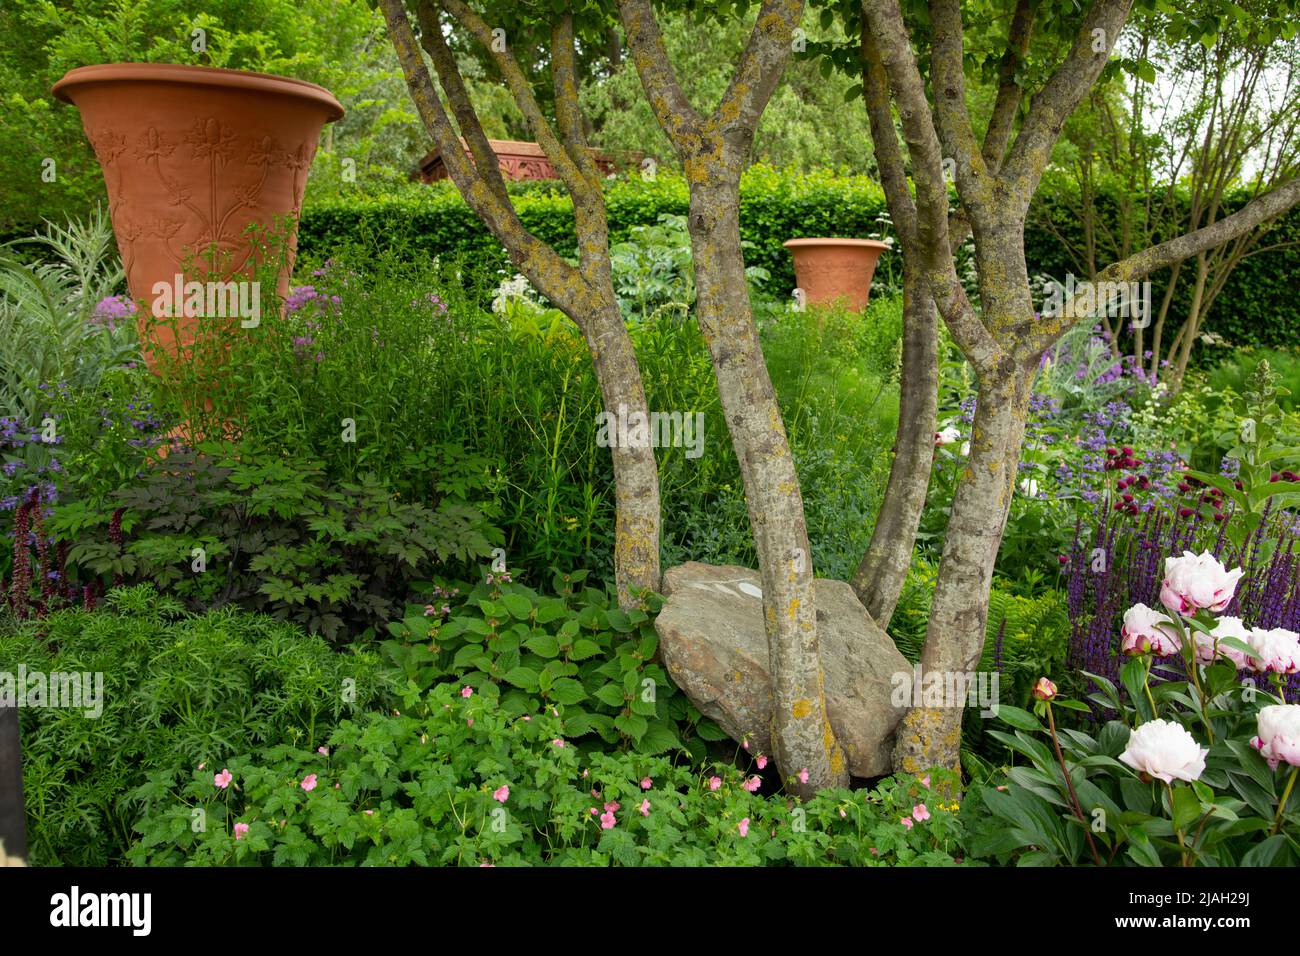 A boulder in the multi stemmed trunk of Carpinus betulus - Hornbeam and large decorative urns decorated with a thistle moftif designed by Whichford Po Stock Photo